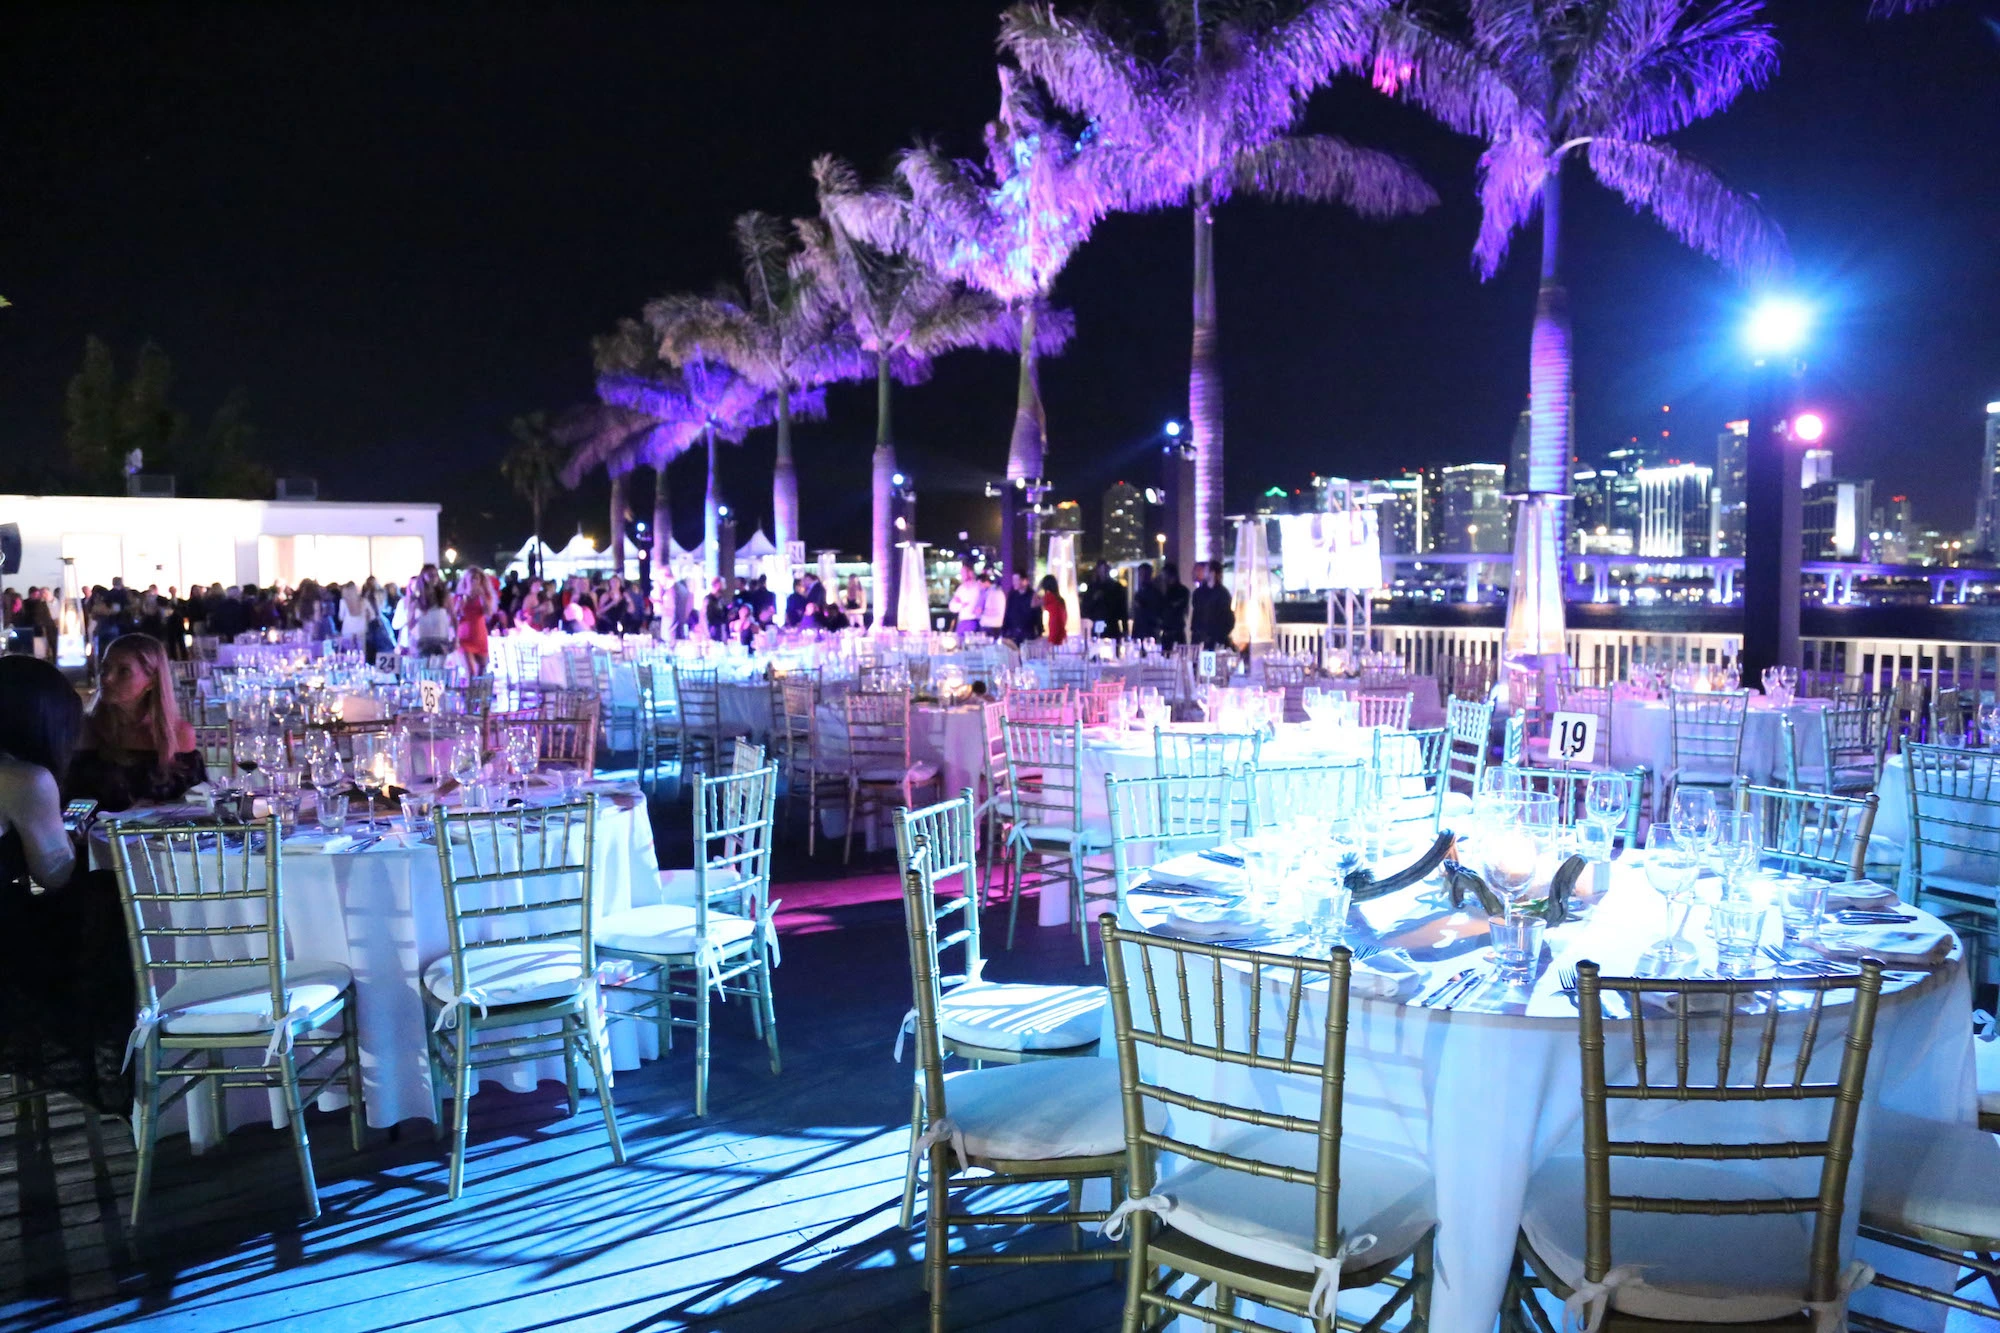 photo of tables outside by palm trees at night